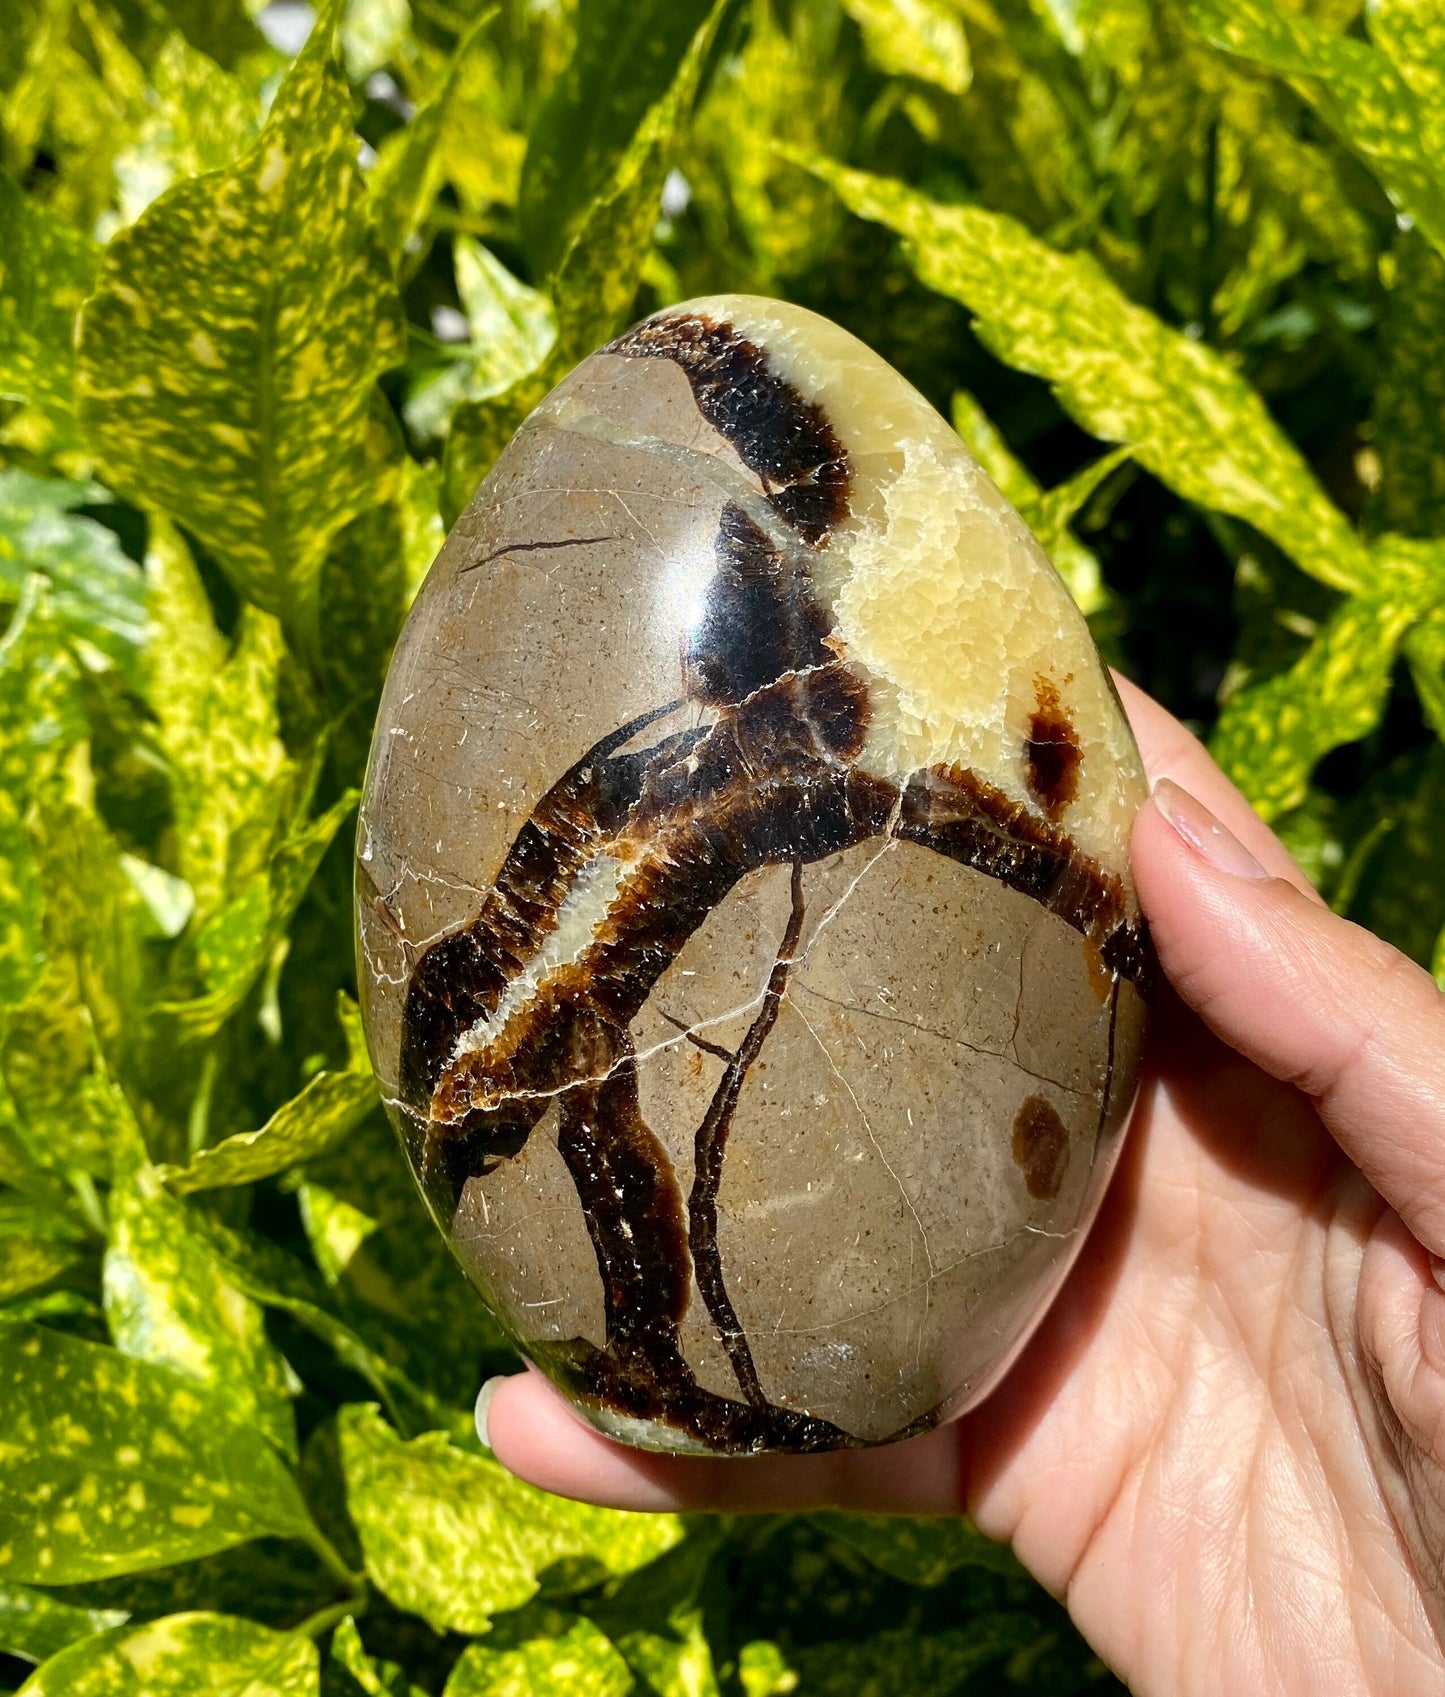 Septarian Dragon Polished Freeform Stone / 1-2 pounds each / Fossilized mud / Supports Confidence Patience and Strength